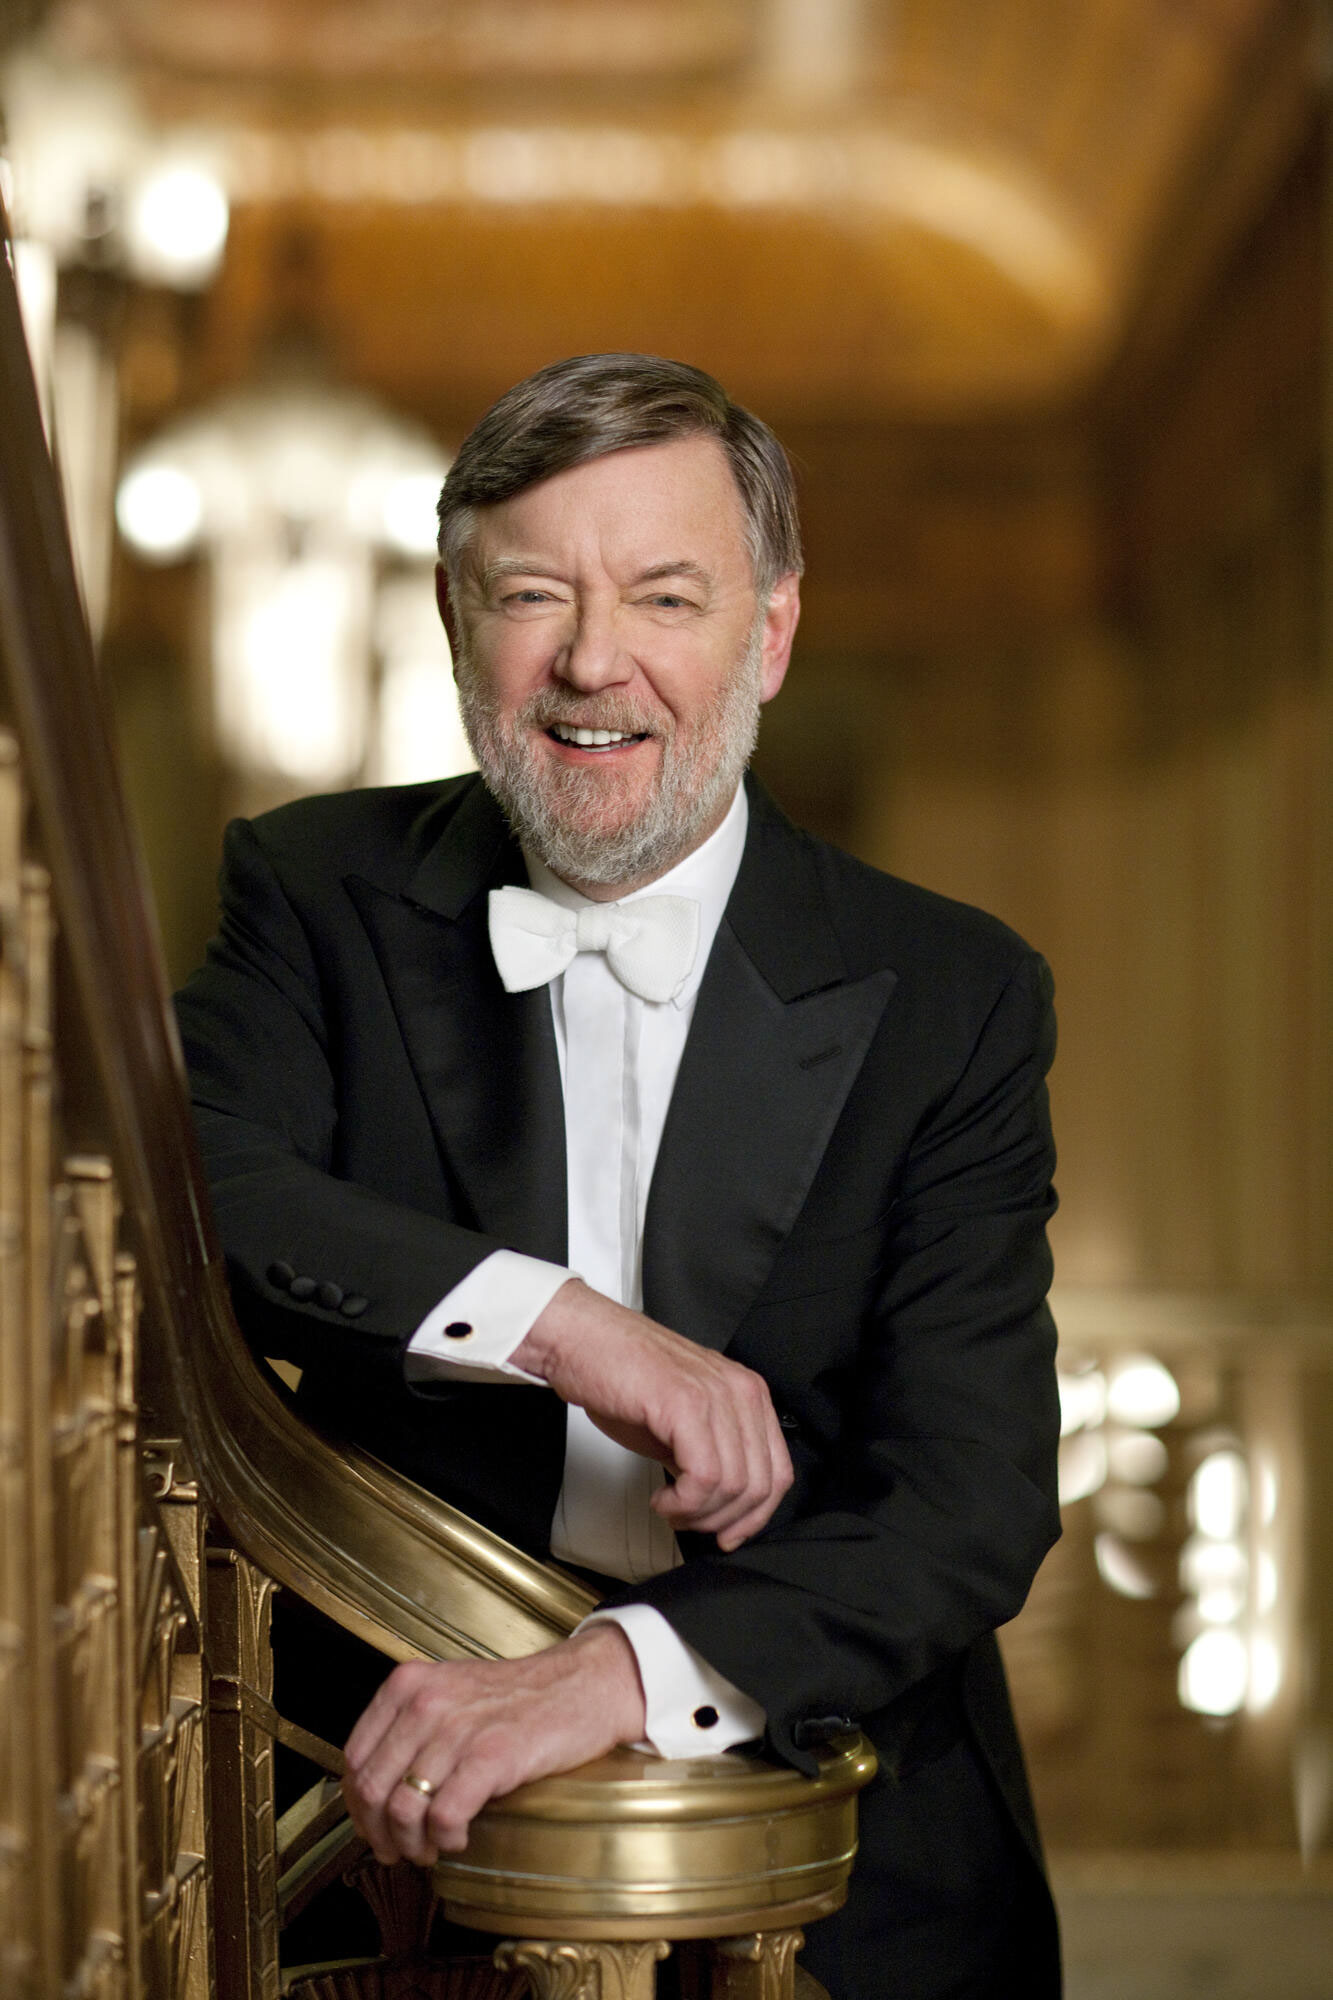 Sir Andrew Davis smiling in suit and white bowtie